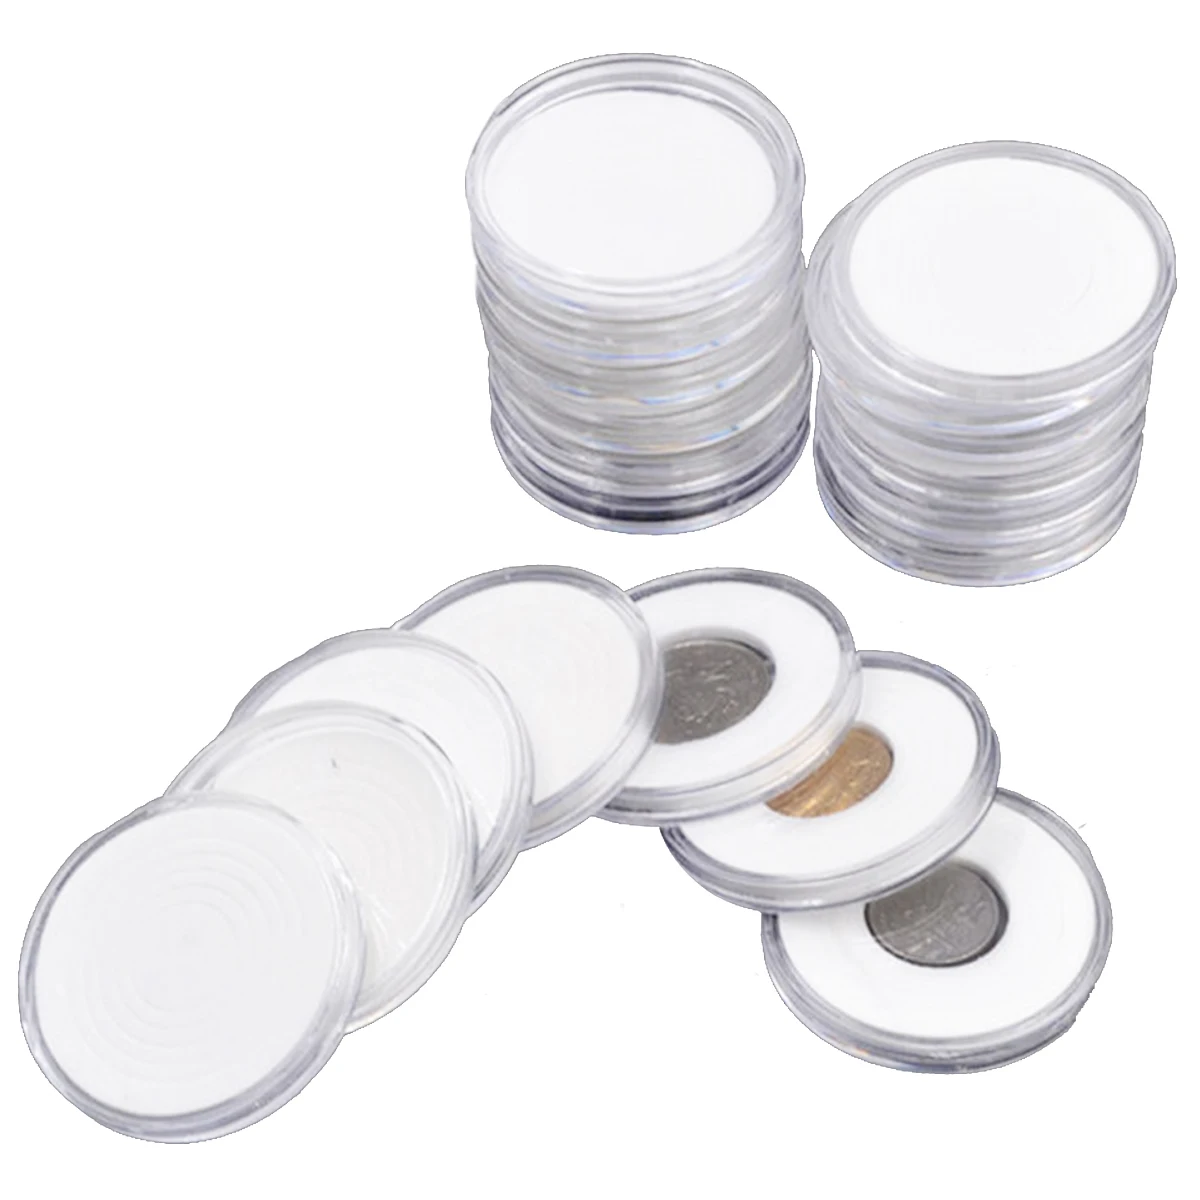 

60 Pcs 46mm Coin Cases Capsules Holder Applied Clear Plastic Round Storage Box